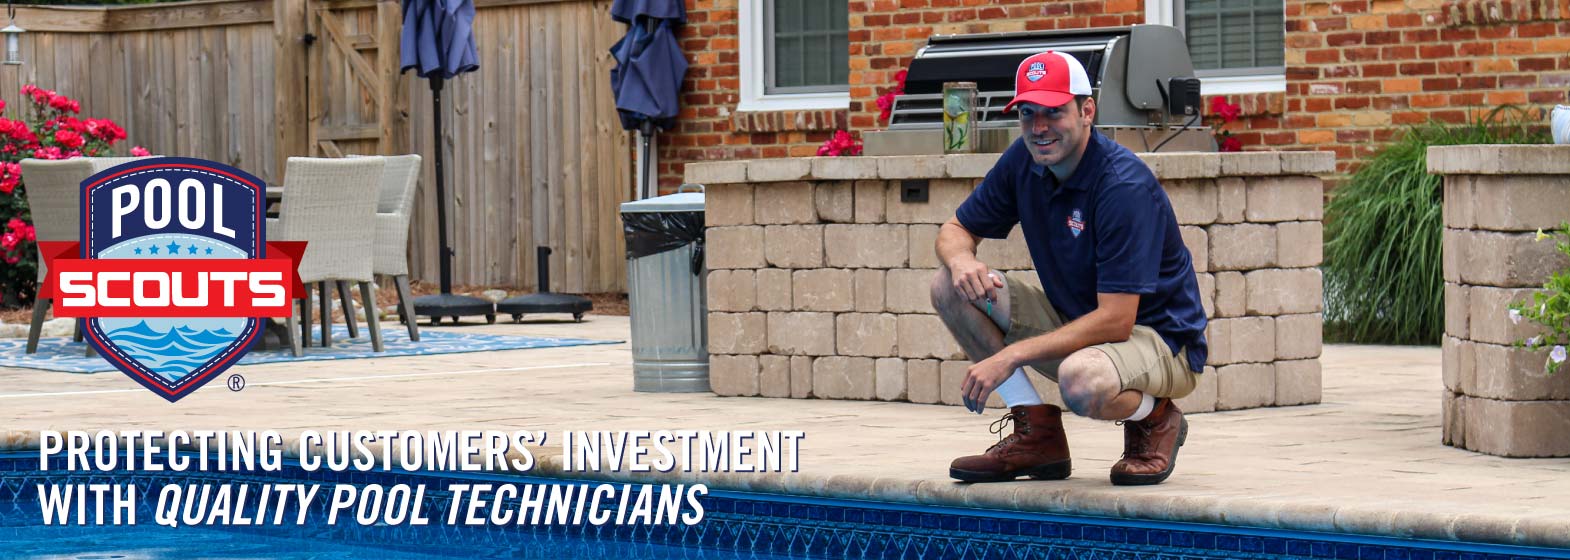 Image of Protecting Customers' Investment With Quality Pool Technicians